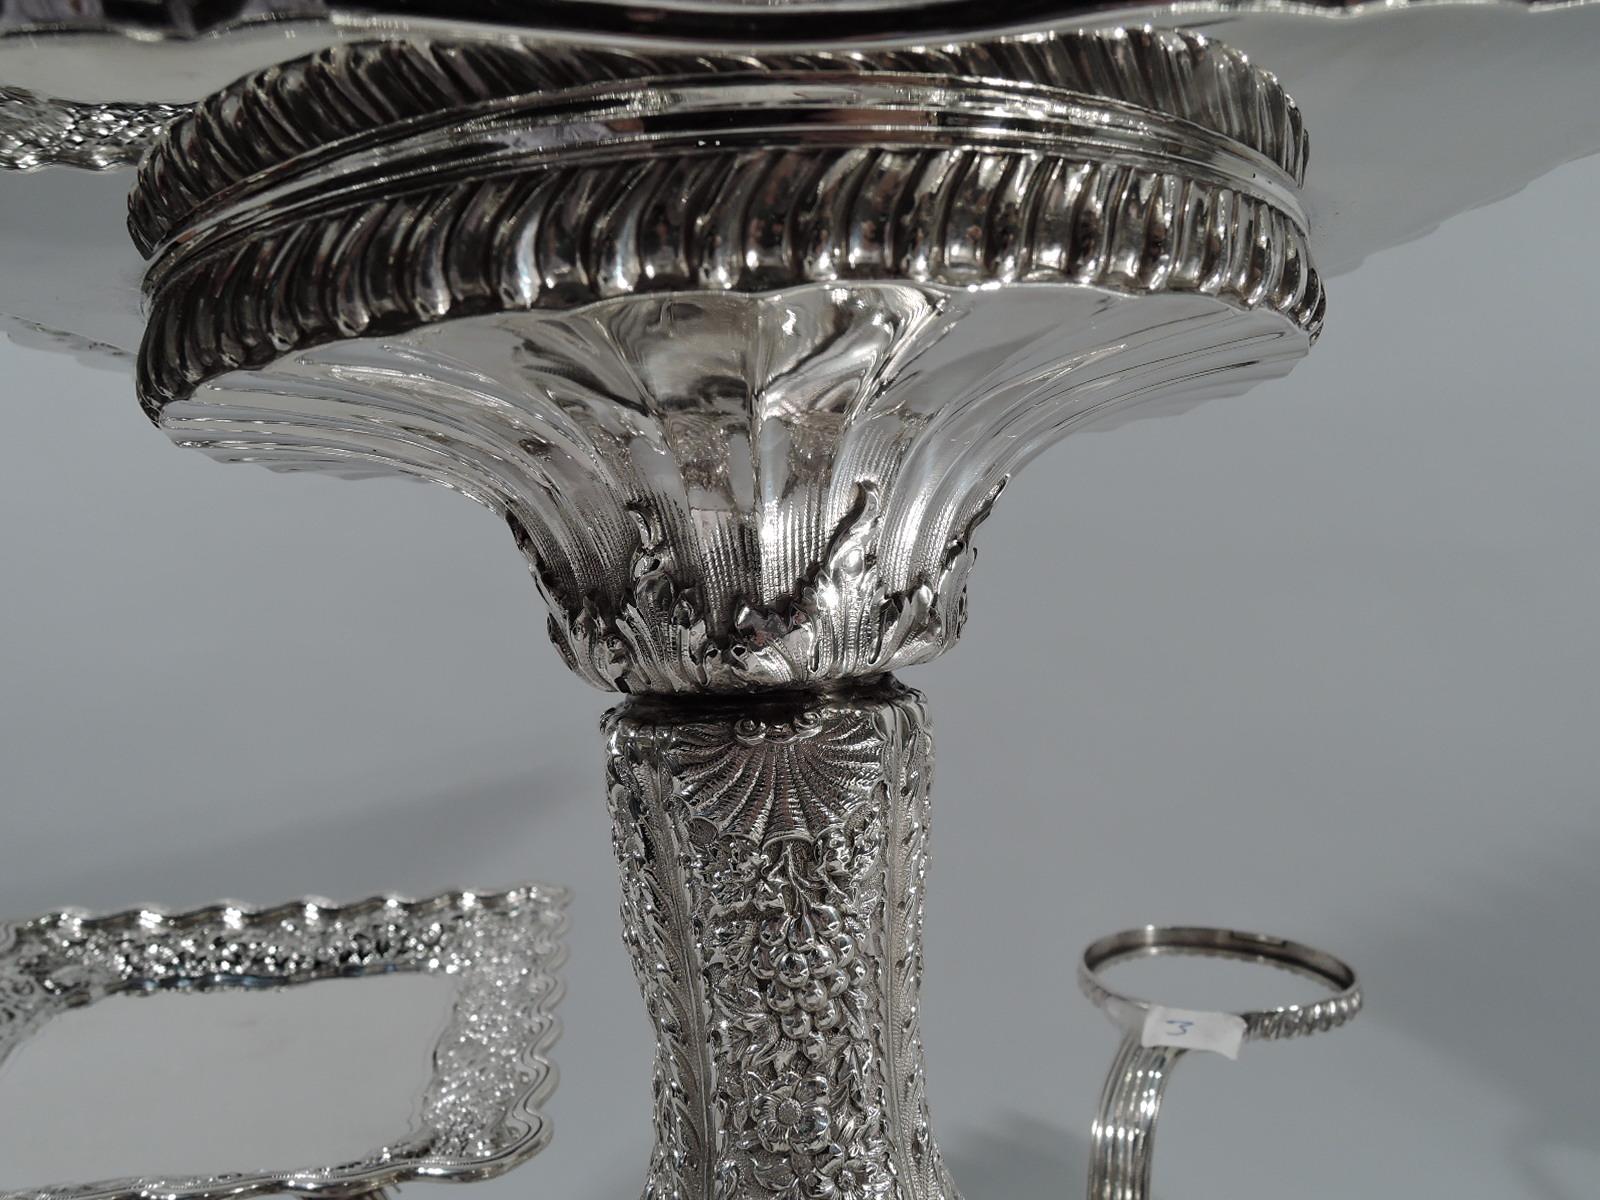 American Rare and Striking Tiffany Repousse Sterling Silver Epergne Centerpiece